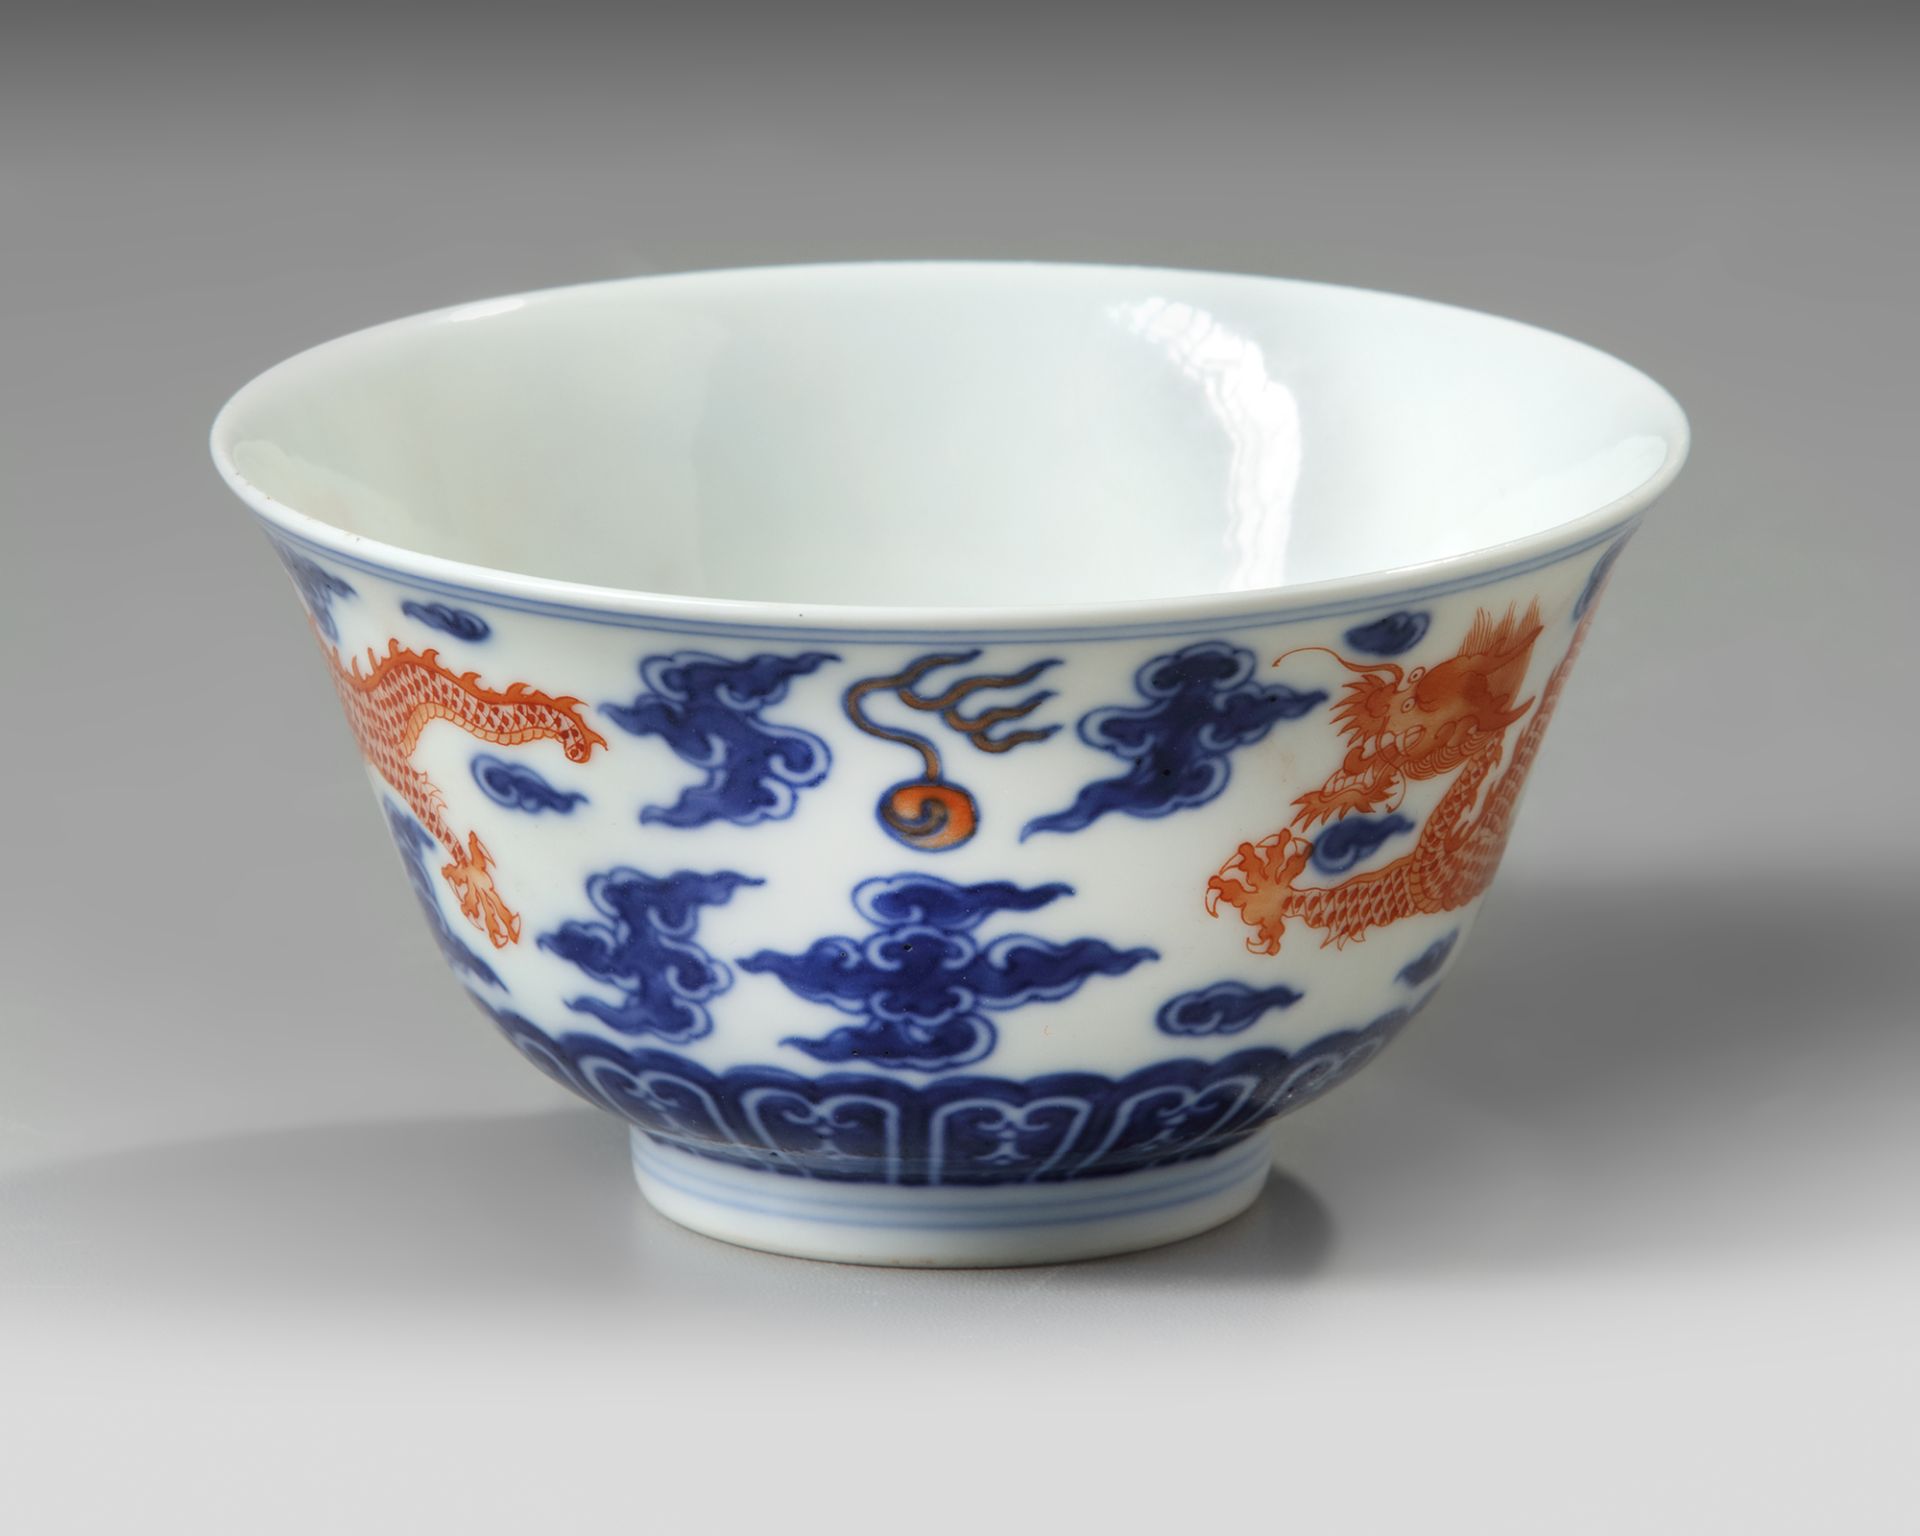 A CHINESE BLUE AND WHITE IRON-RED DECORATED 'DRAGON' BOWL, SIX-CHARACTER JIAQING MARK AND OF THE PER - Image 4 of 5